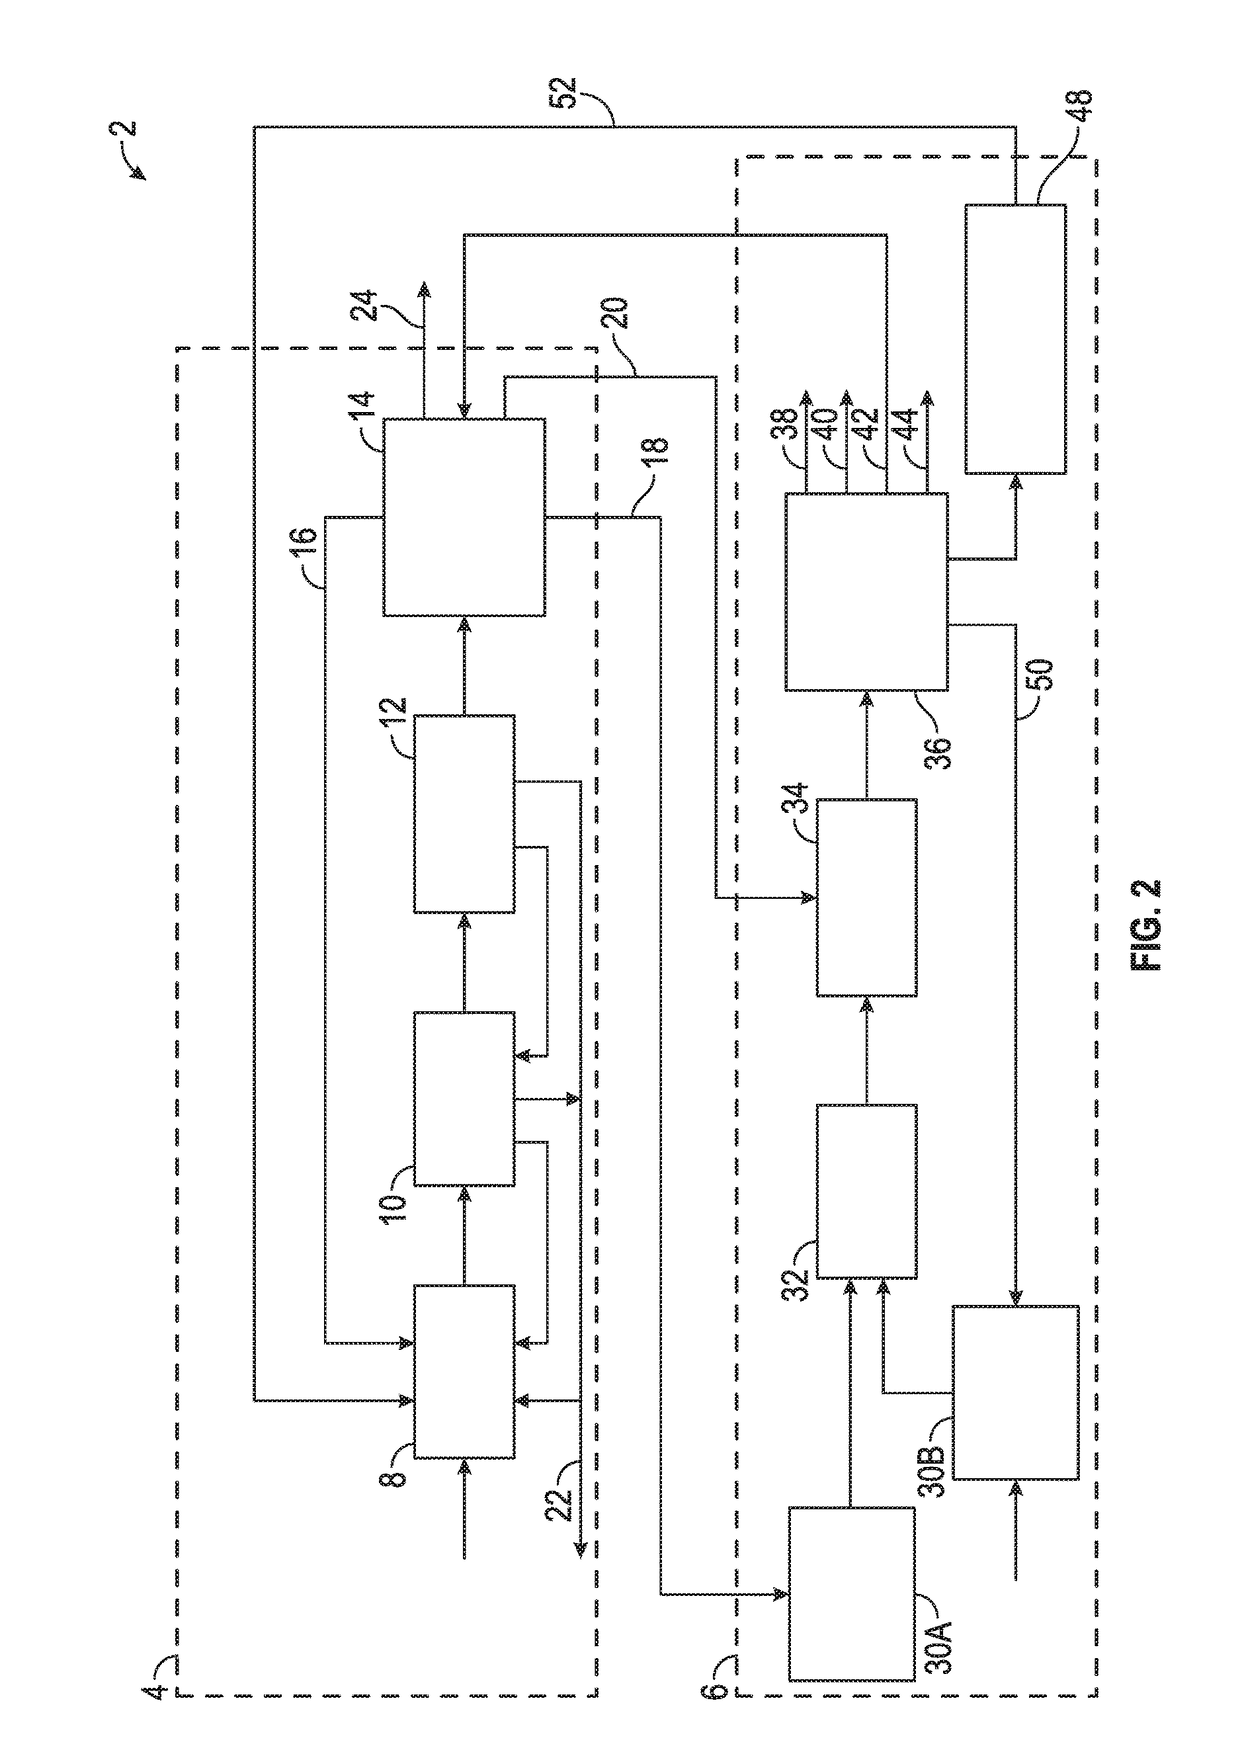 Recycling system and process of a methanol-to-propylene and steam cracker plant